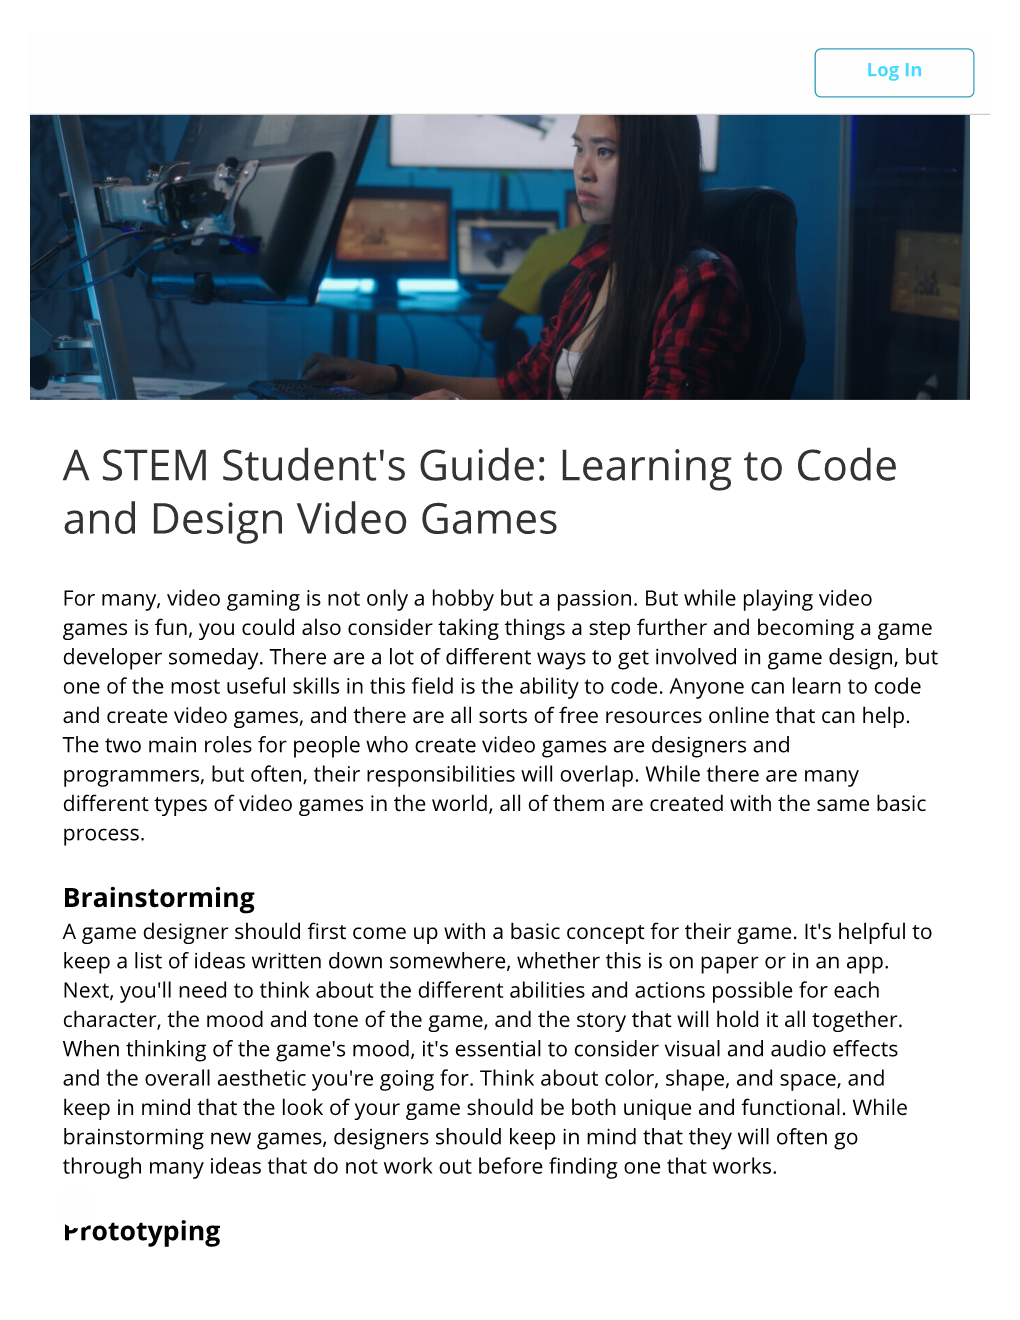 STEM Student's Guide: Learning to Code and Design Video Games